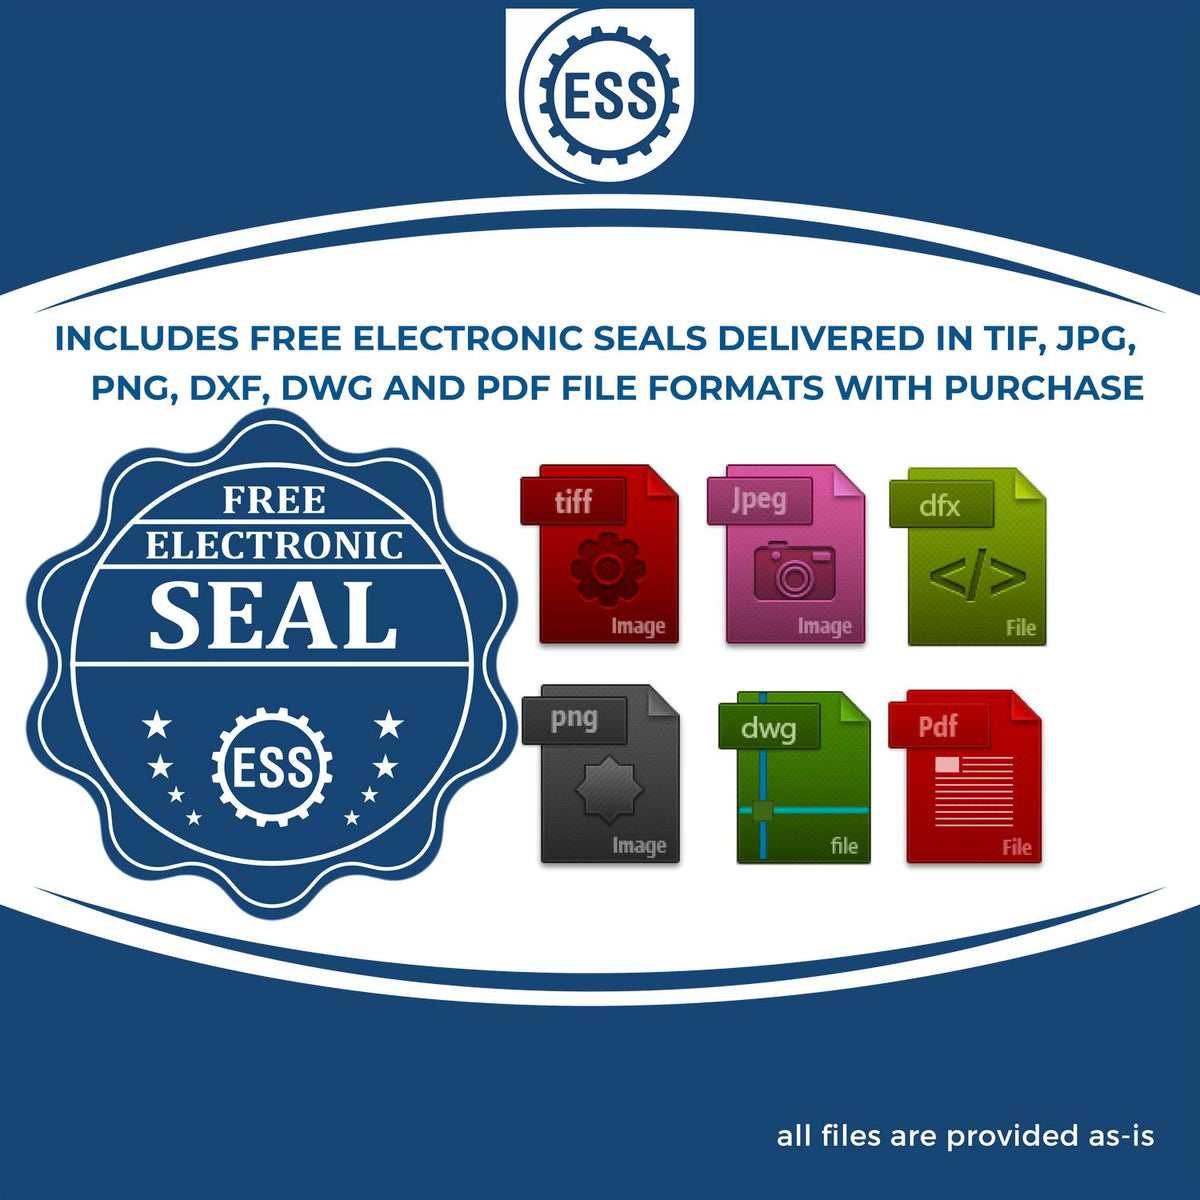 An infographic for the free electronic seal for the Slim Pre-Inked Ohio Professional Engineer Seal Stamp illustrating the different file type icons such as DXF, DWG, TIF, JPG and PNG.